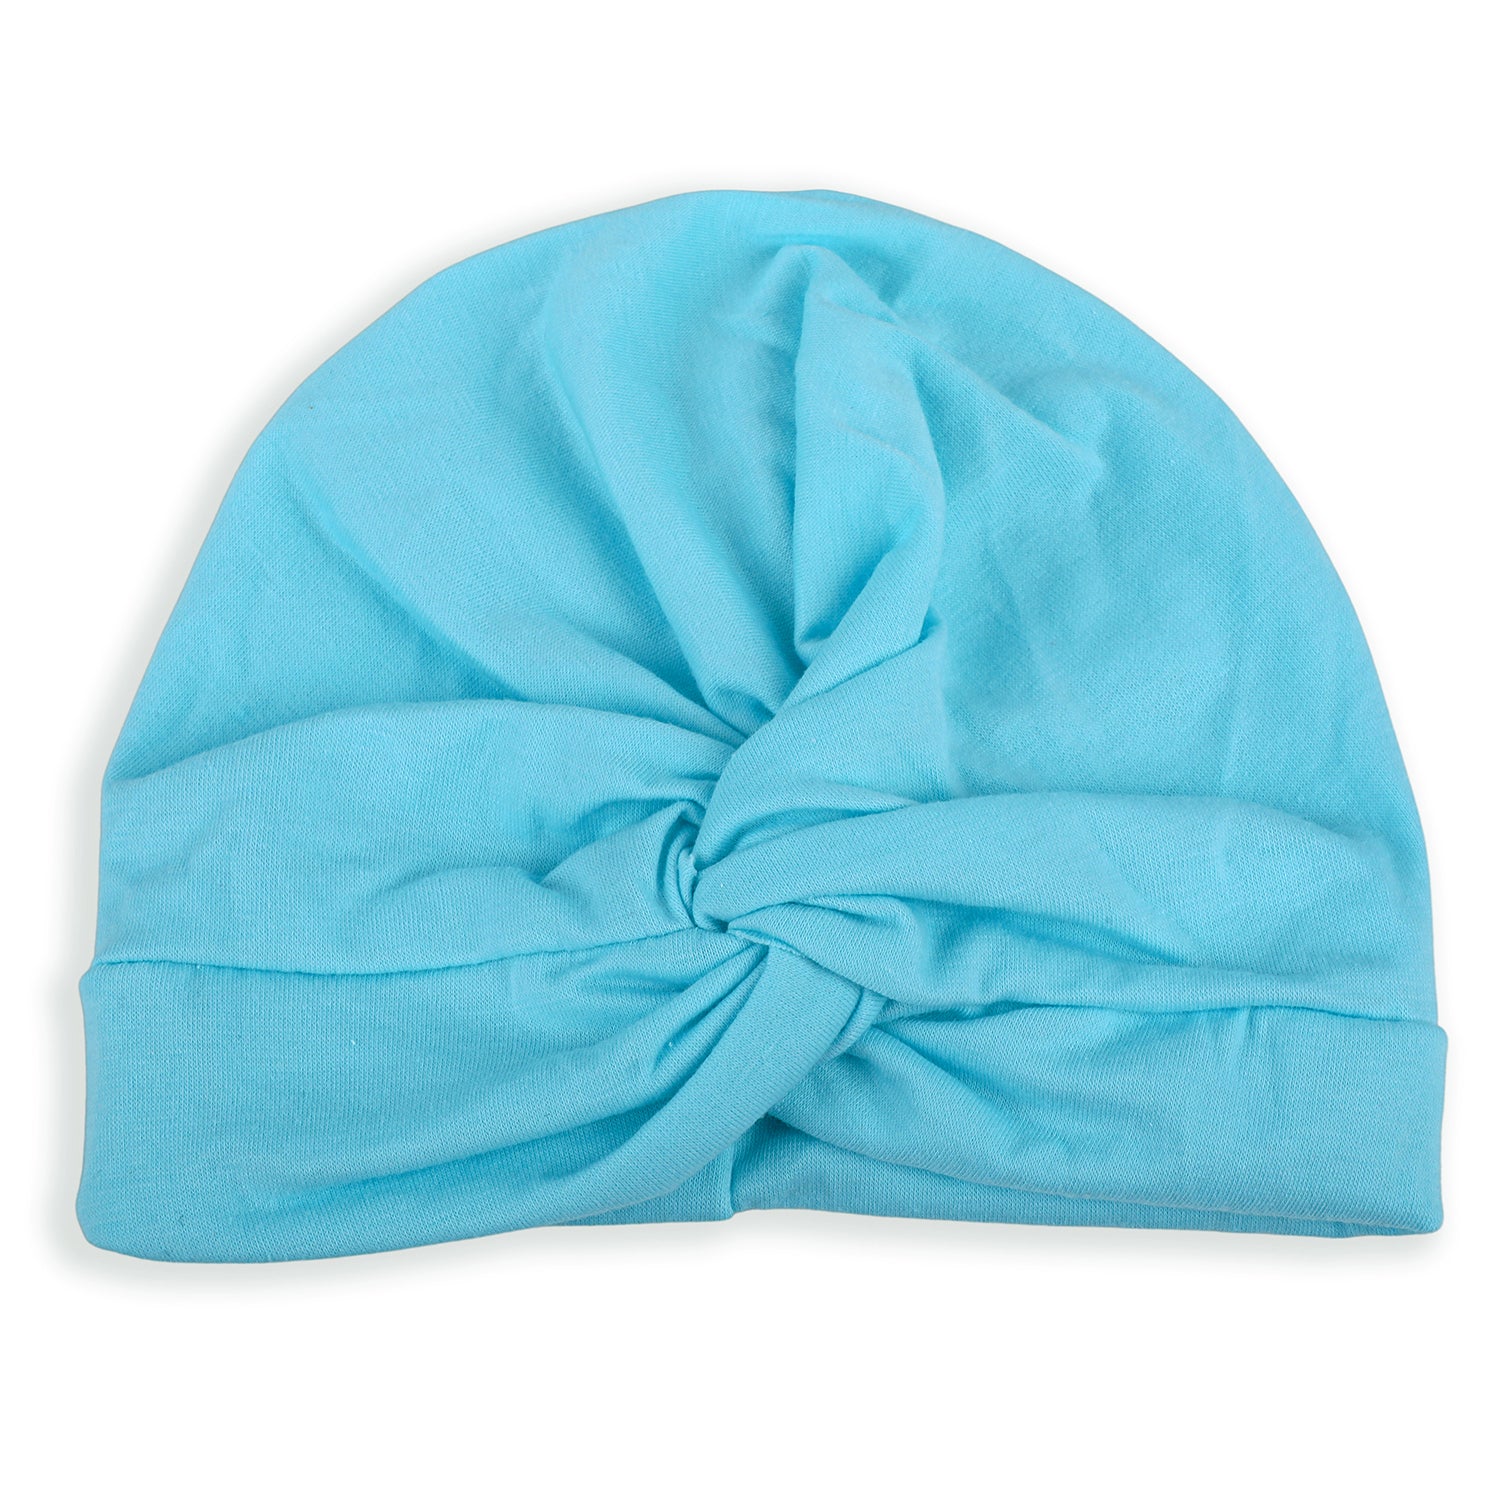 Cute Knotted Turban Cap Infant Beanie - Blue - Baby Moo